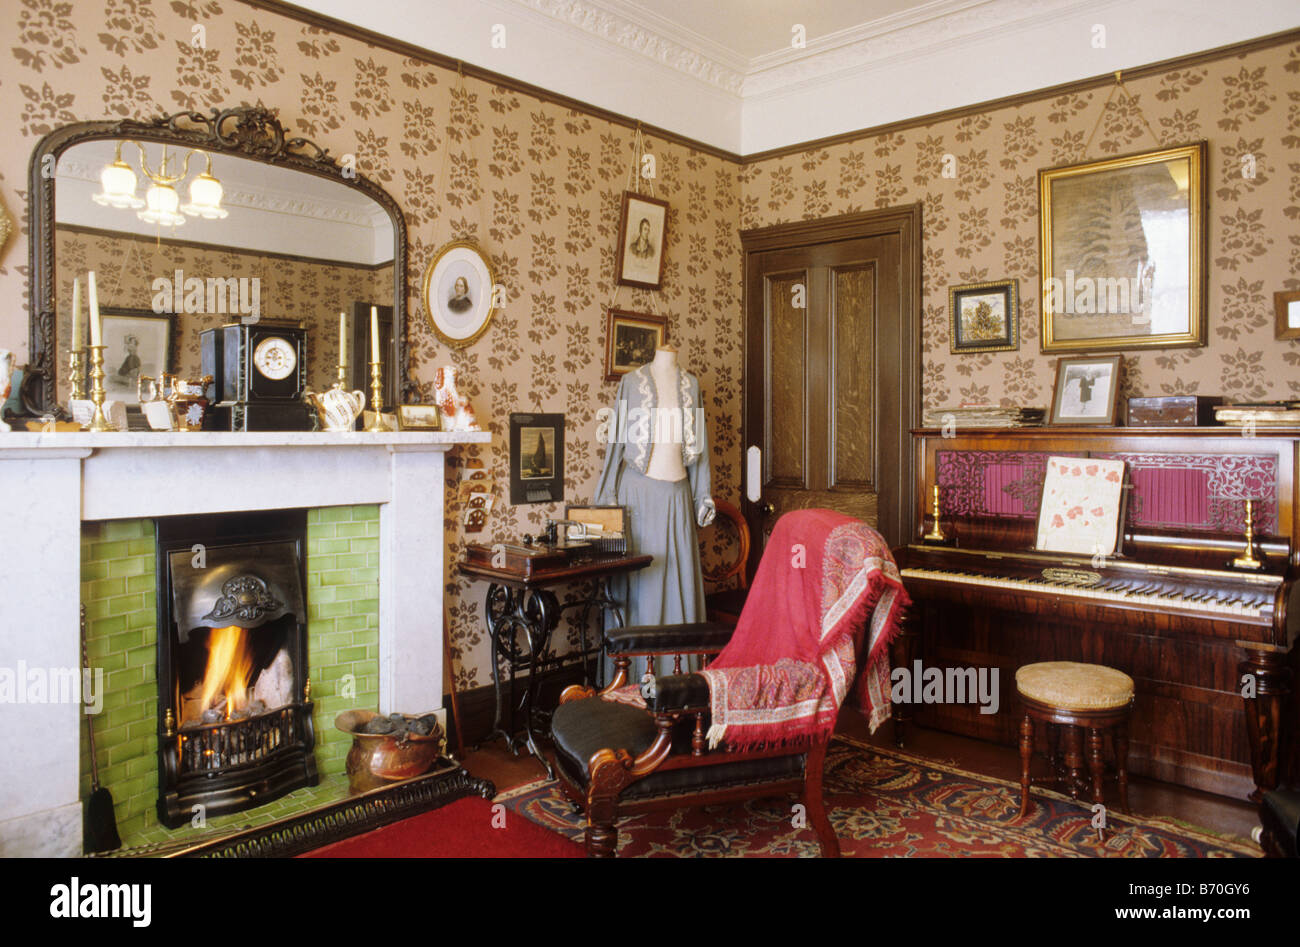 Glasgow The Tenement House period sitting room Scotland UK interior view museum furnished fire furniture domestic heritage Stock Photo